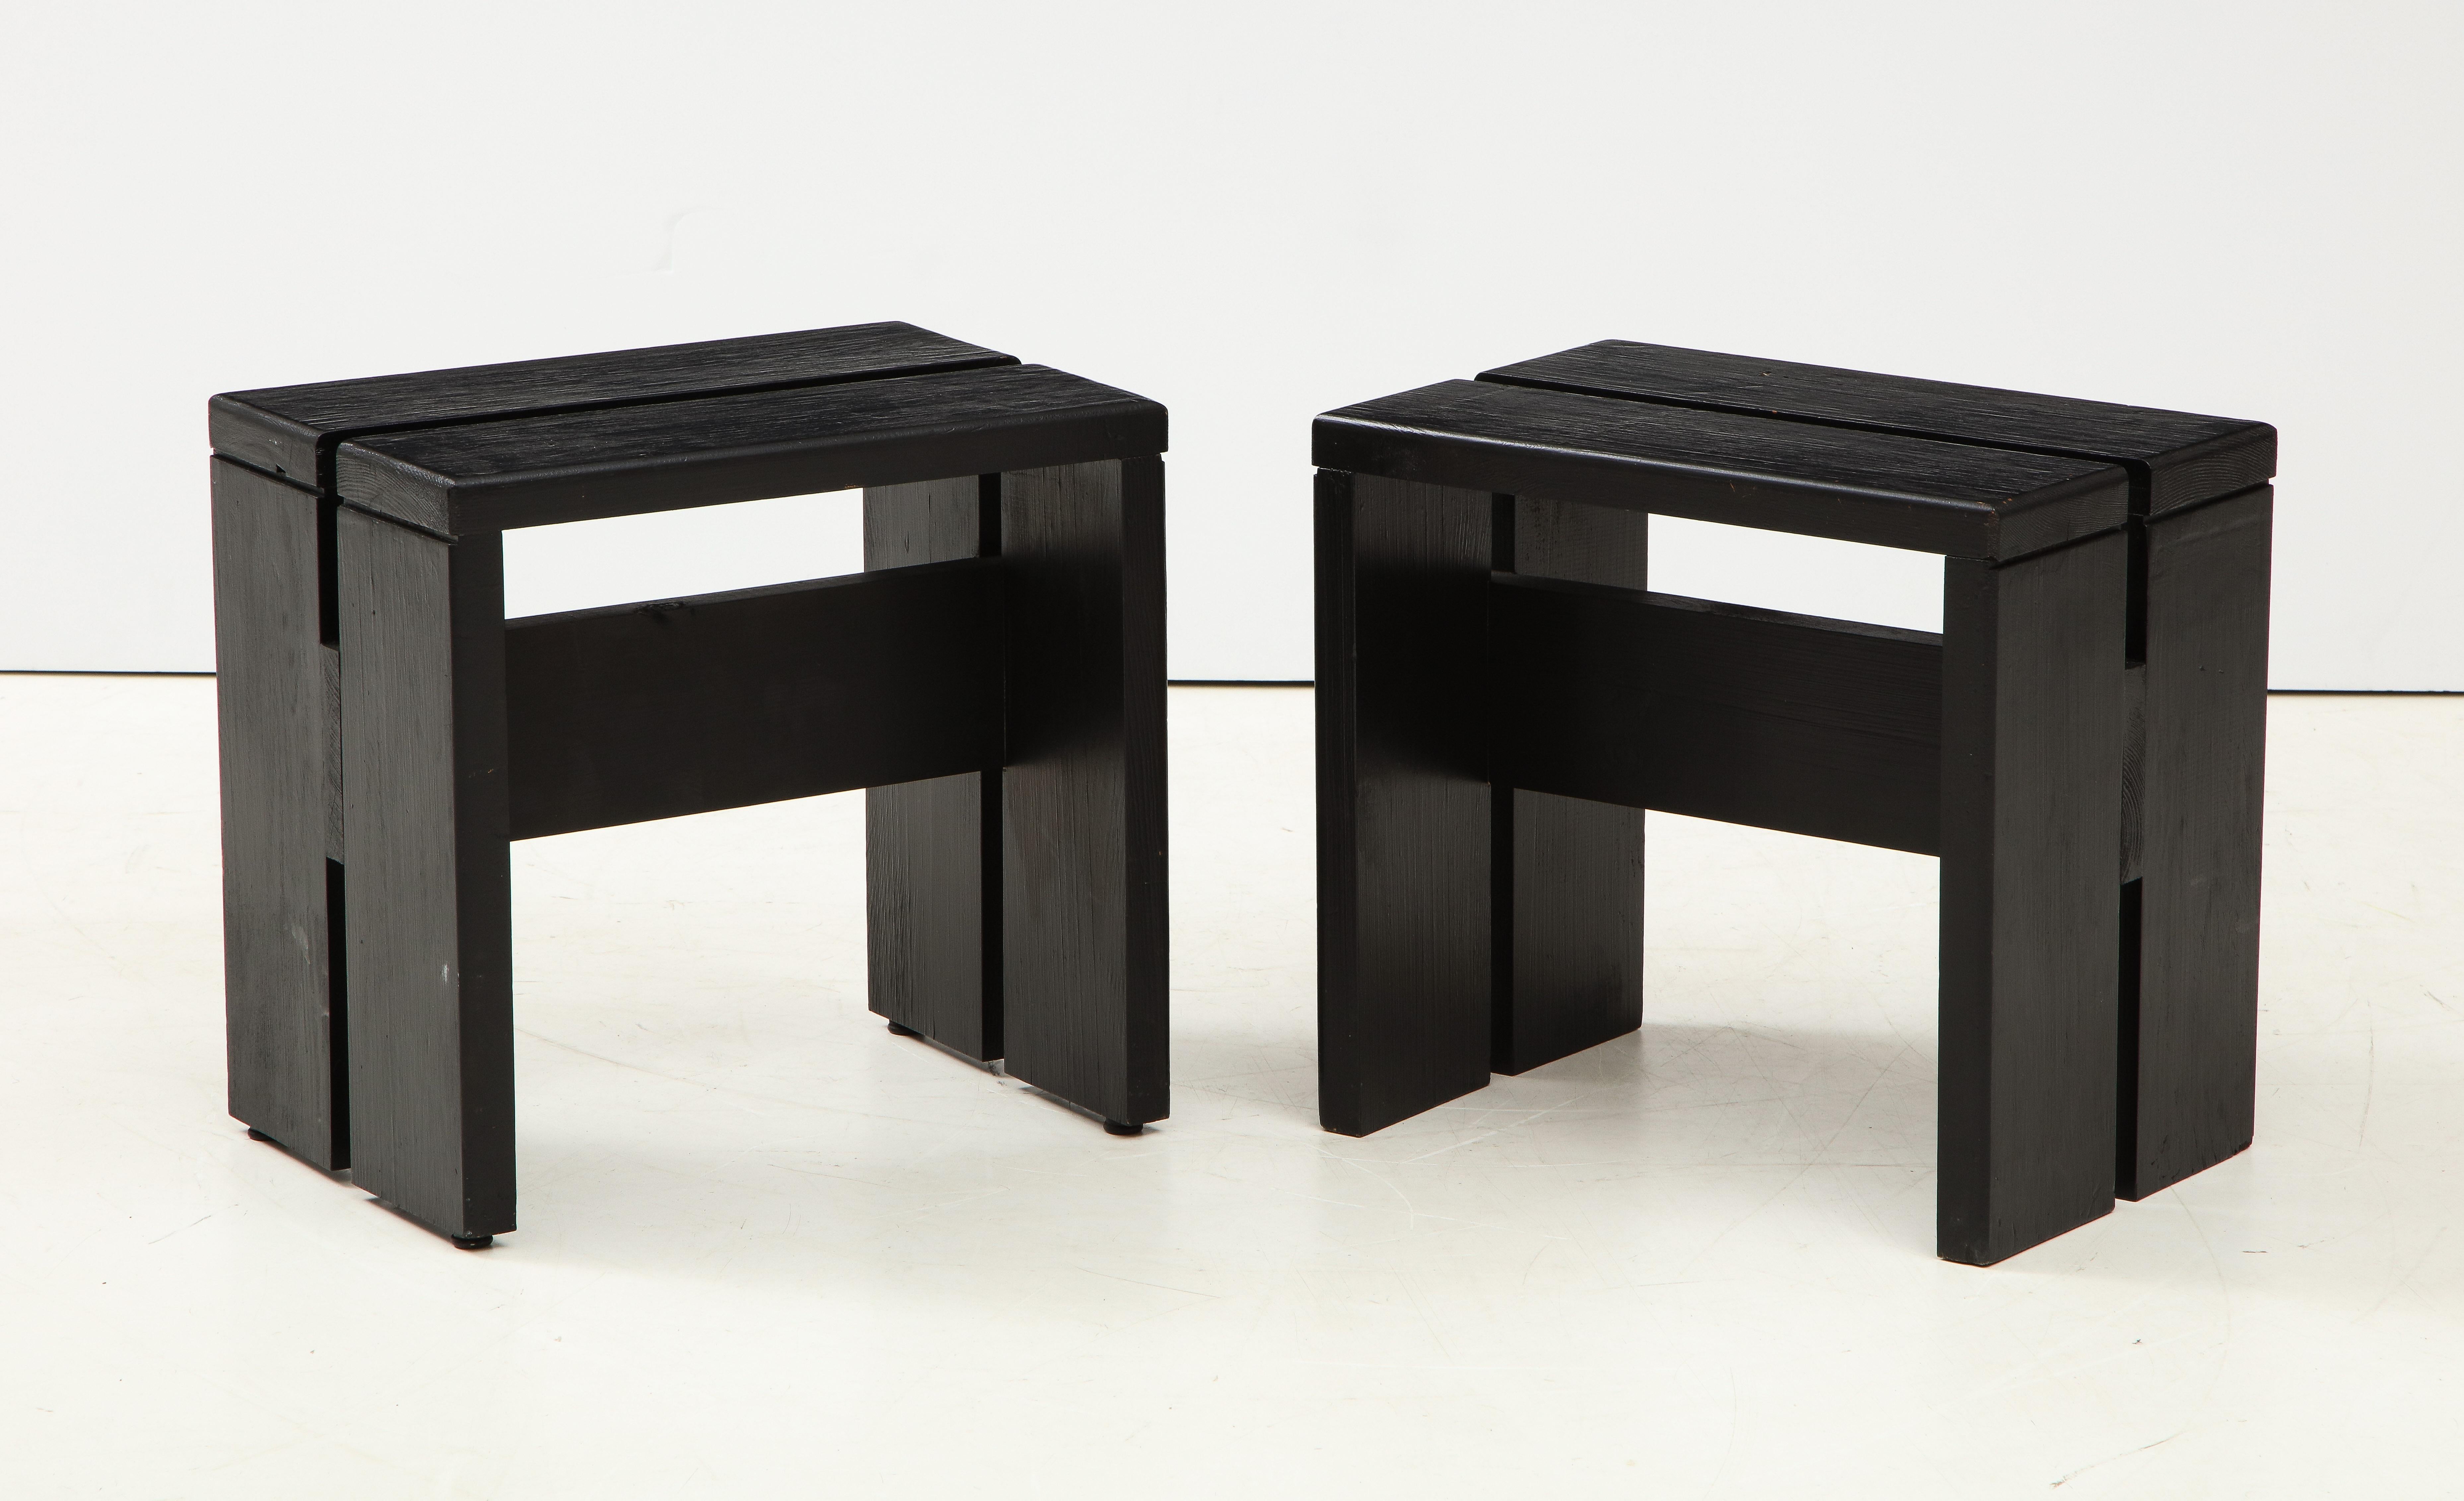 French Mid-Century Pine Les Arcs Stools by Charlotte Perriand, France, c. 1960